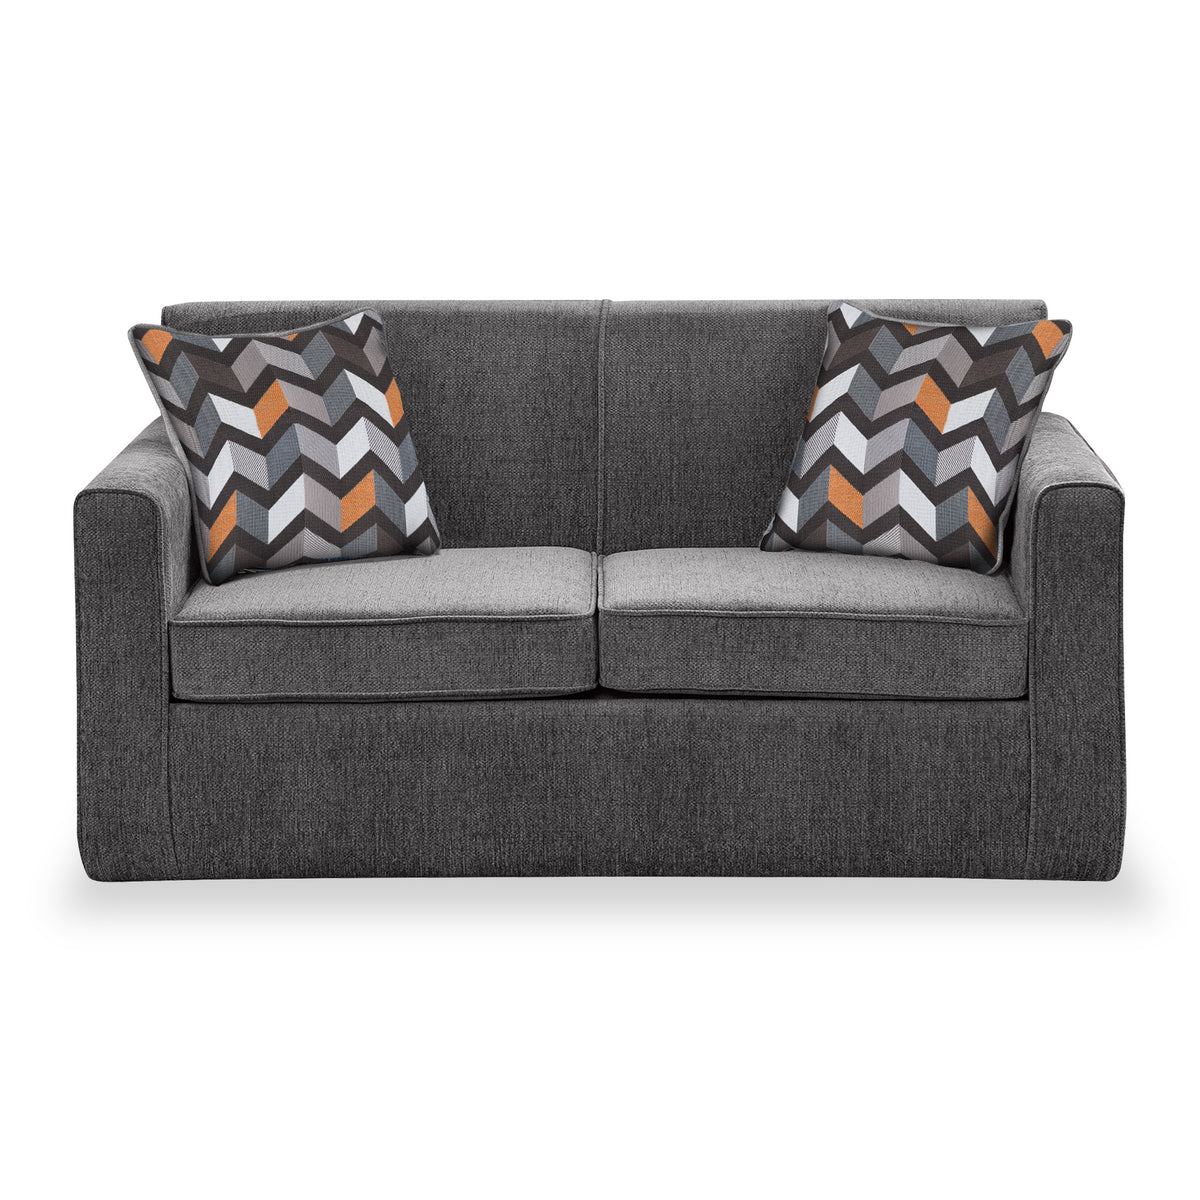 Welton Charcoal Soft Weave 2 Seater Sofa Bed with Morelisa Charcoal Cushions